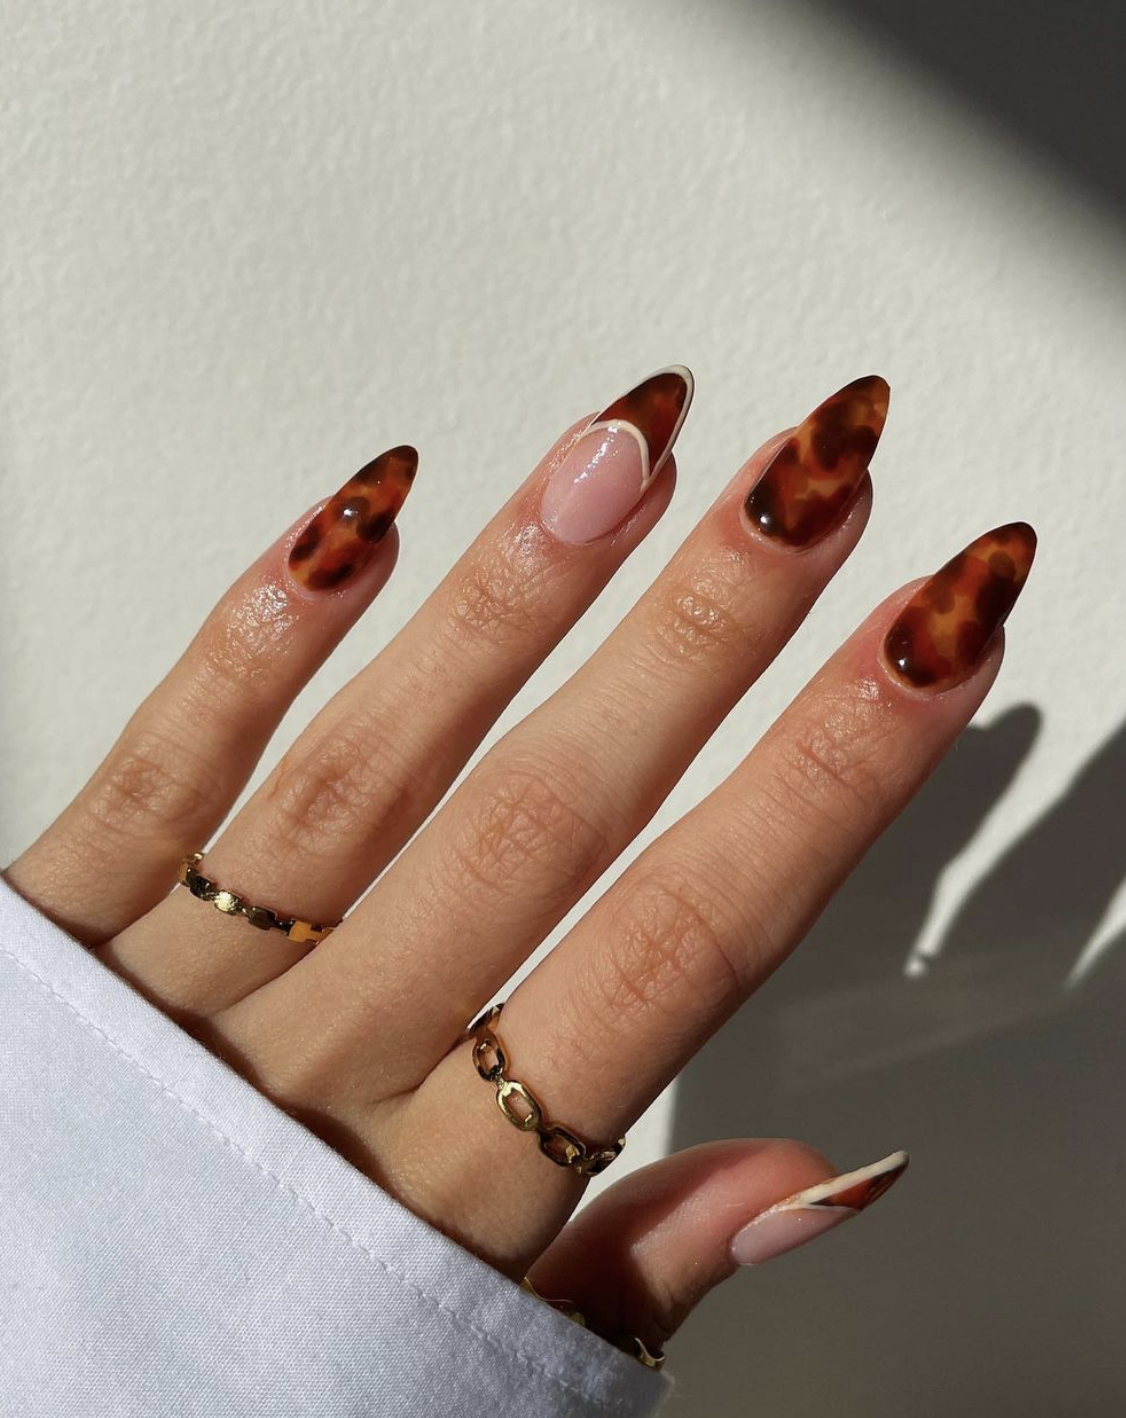 Coffee shades on the nails look sophisticated.